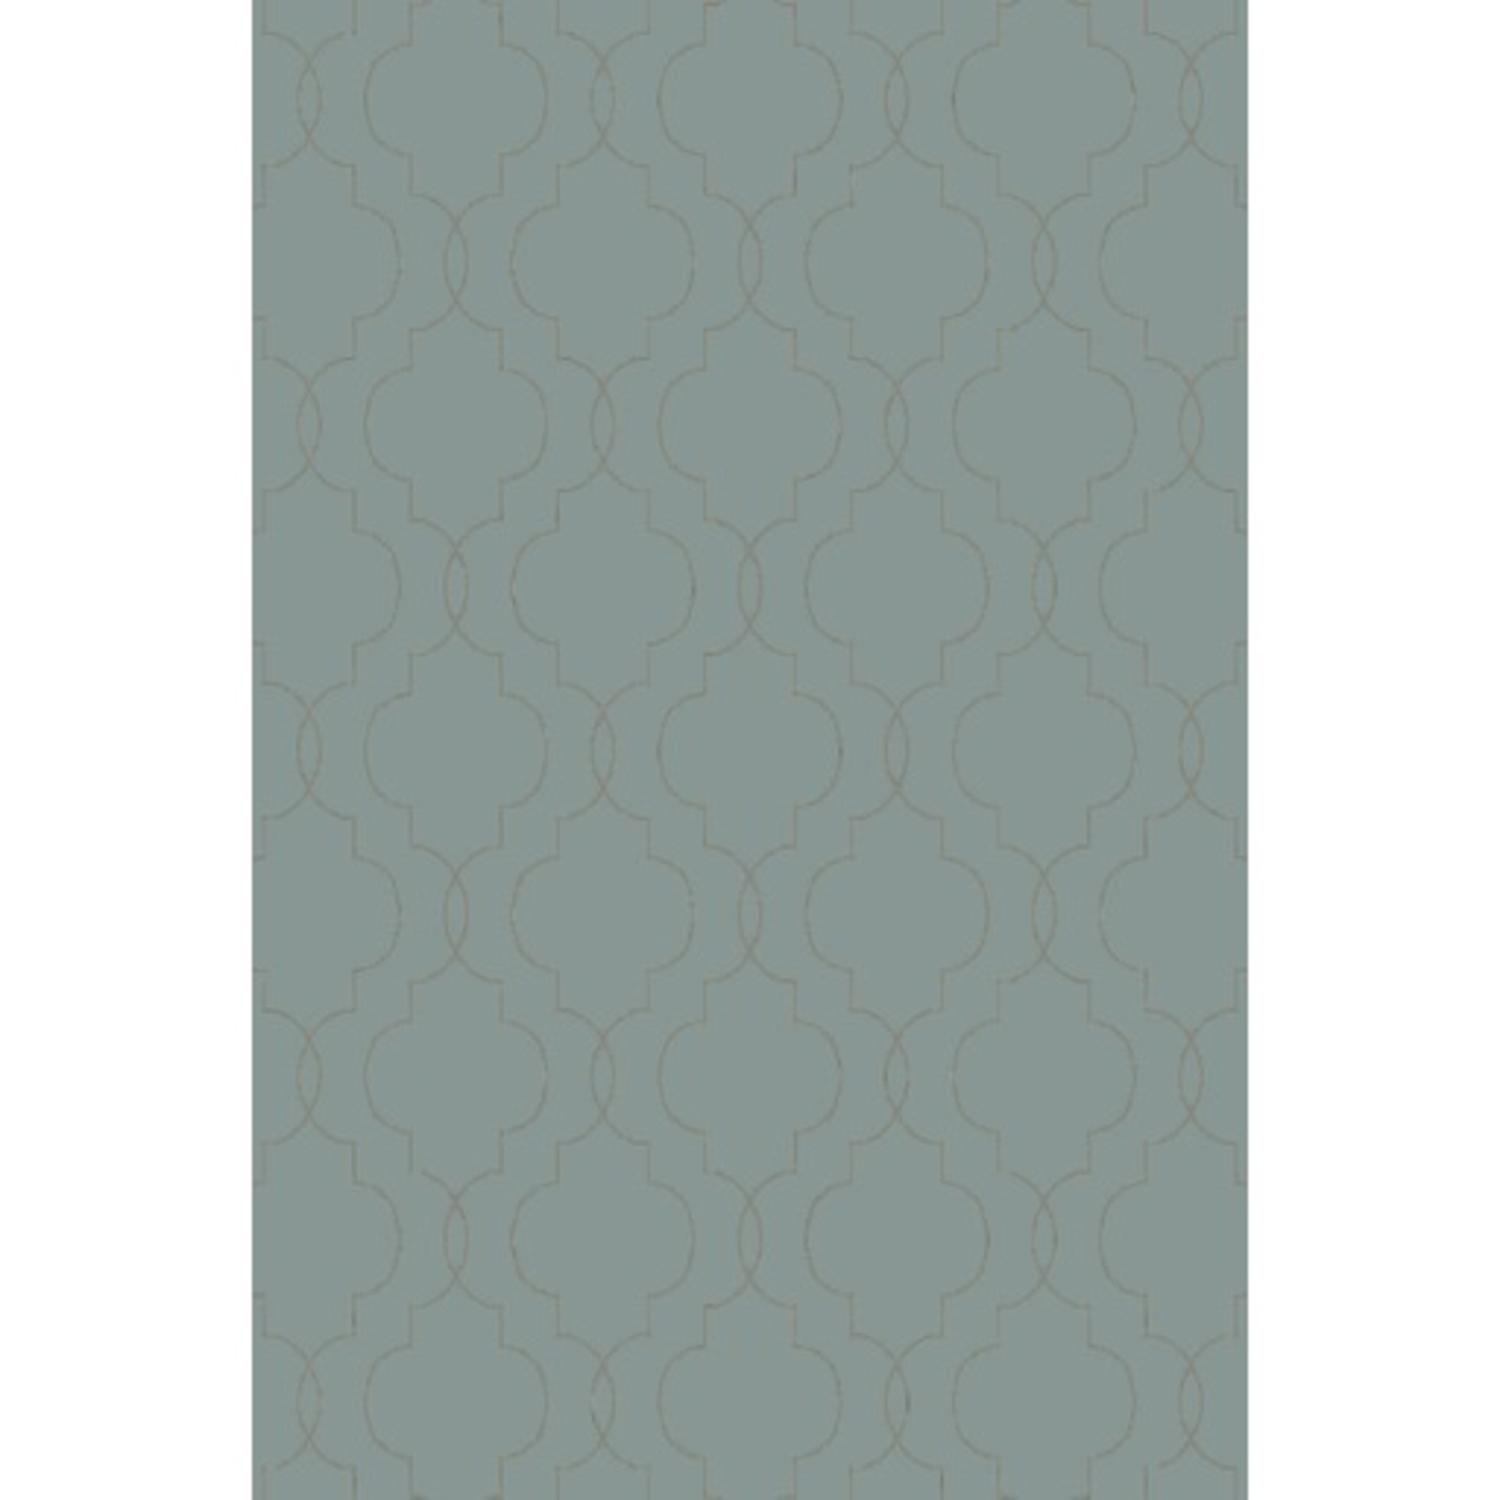 Diva At Home 9' x 13' Dreamy Morracan Treasure Sage Green, Teal and Ivory Wool Area Throw Rug